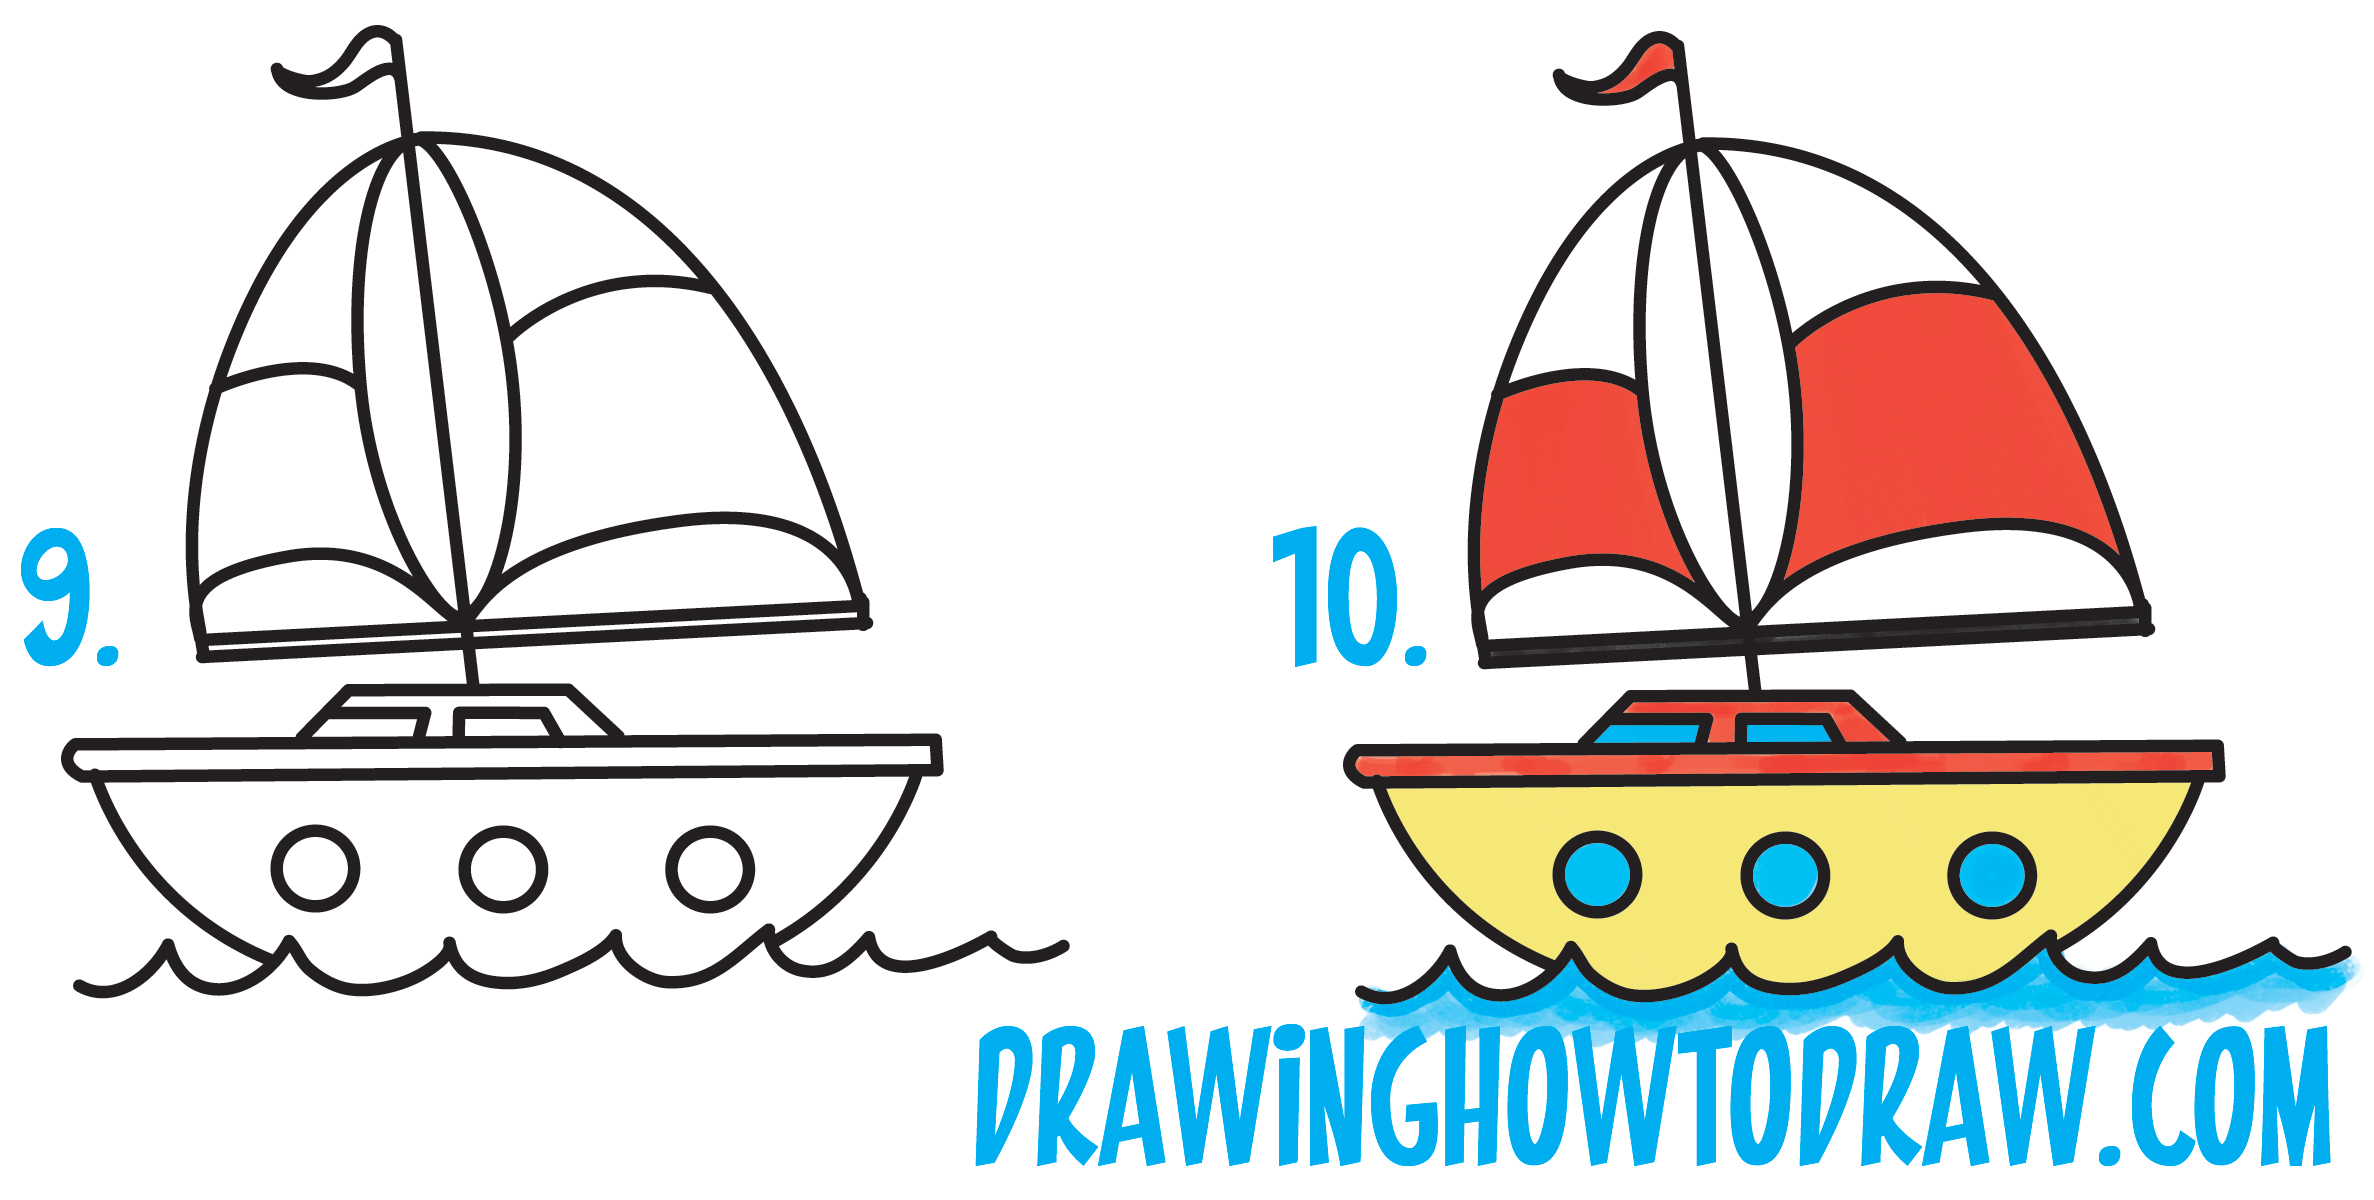 Learn How to Draw a Cartoon Sailboat from the Letter "B" Shape Simple Steps Drawing Tutorial for Kids & Beginners